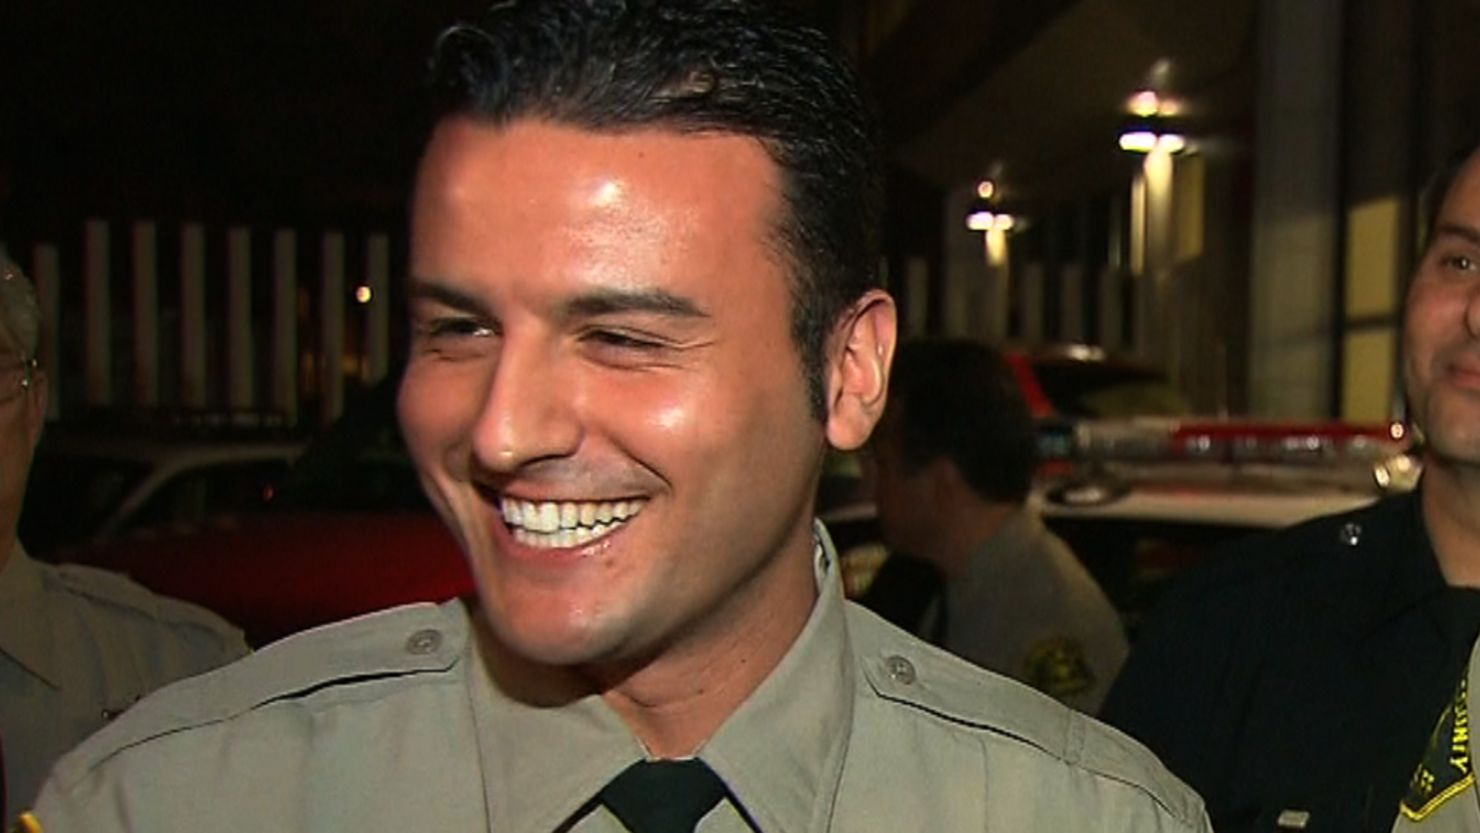 Reserve officer Shervin Lalezary arrested the Los Angeles arson suspect on Monday.